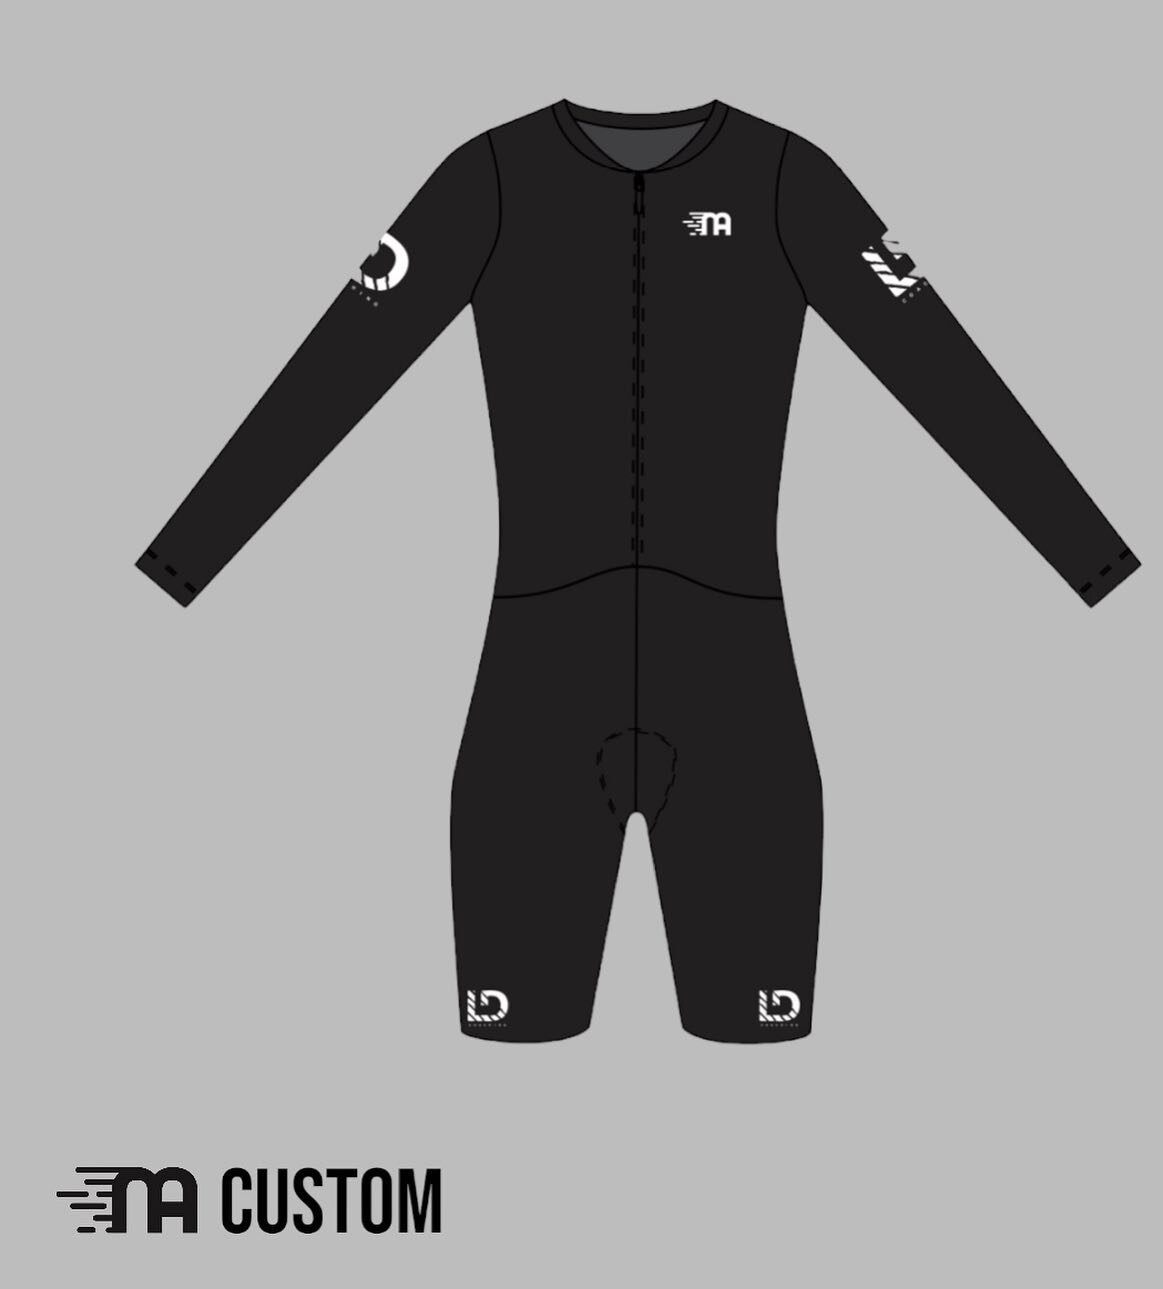 Latest order going in to production of our 1.2 Skinsuits

#moreaerocustom

info@getmoreaero.com